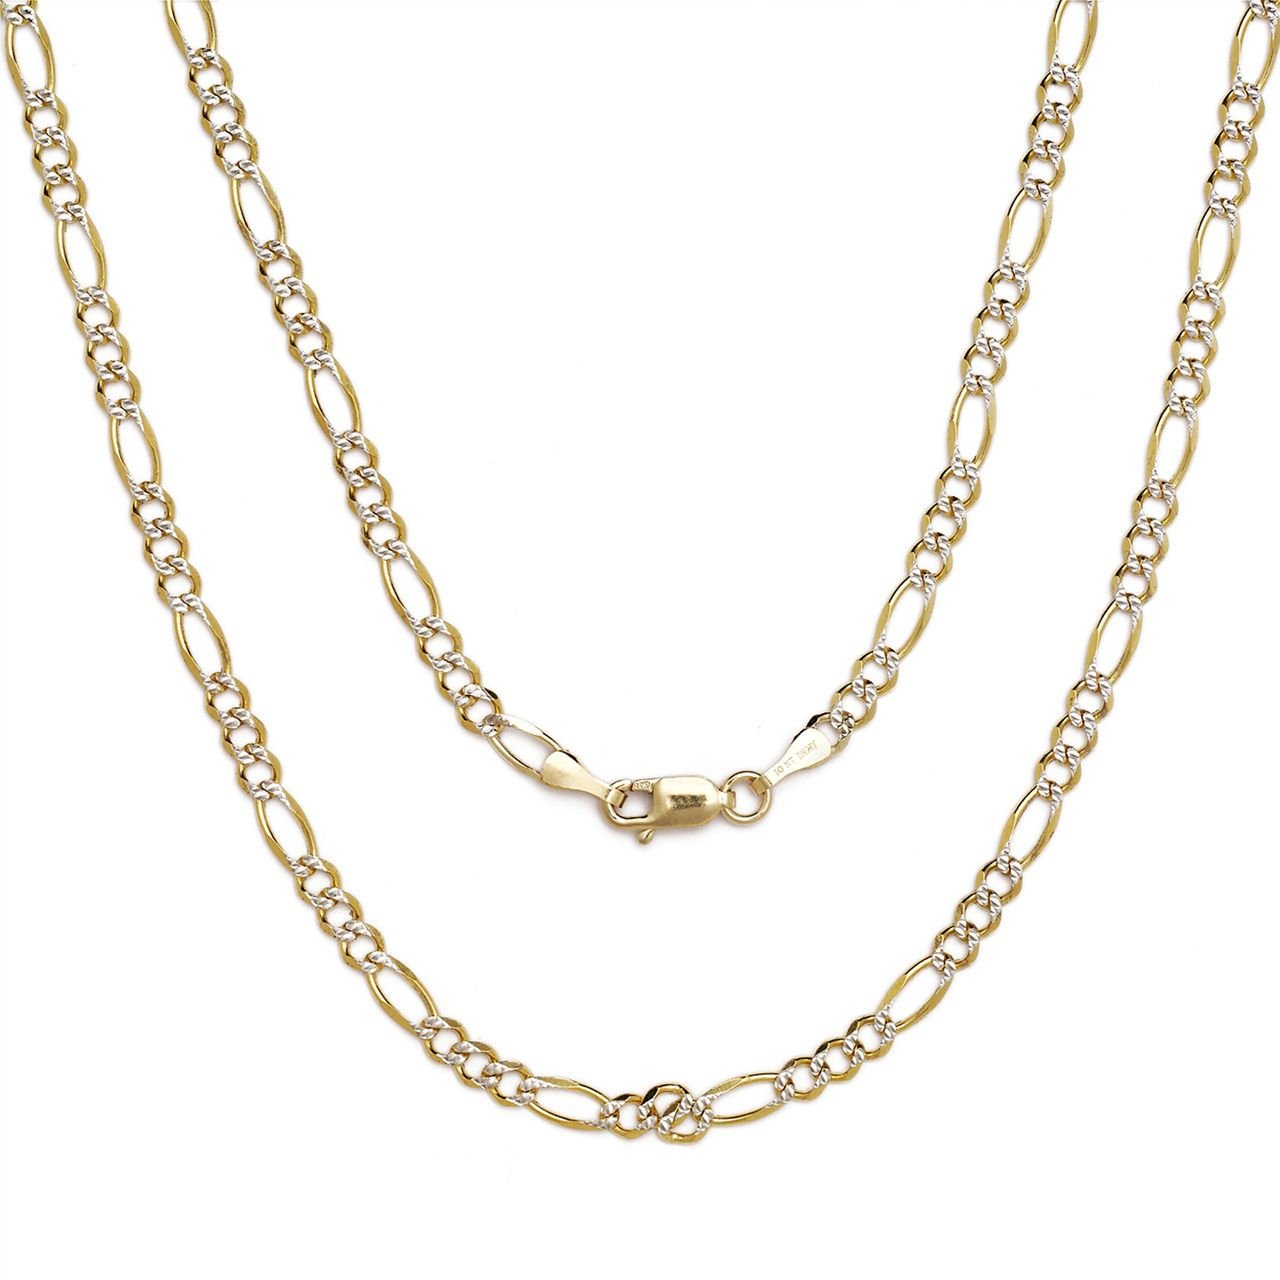 10k Two-Tone Gold Figaro Chain Necklace with White Pave, 0.13 Inch (3.2mm)